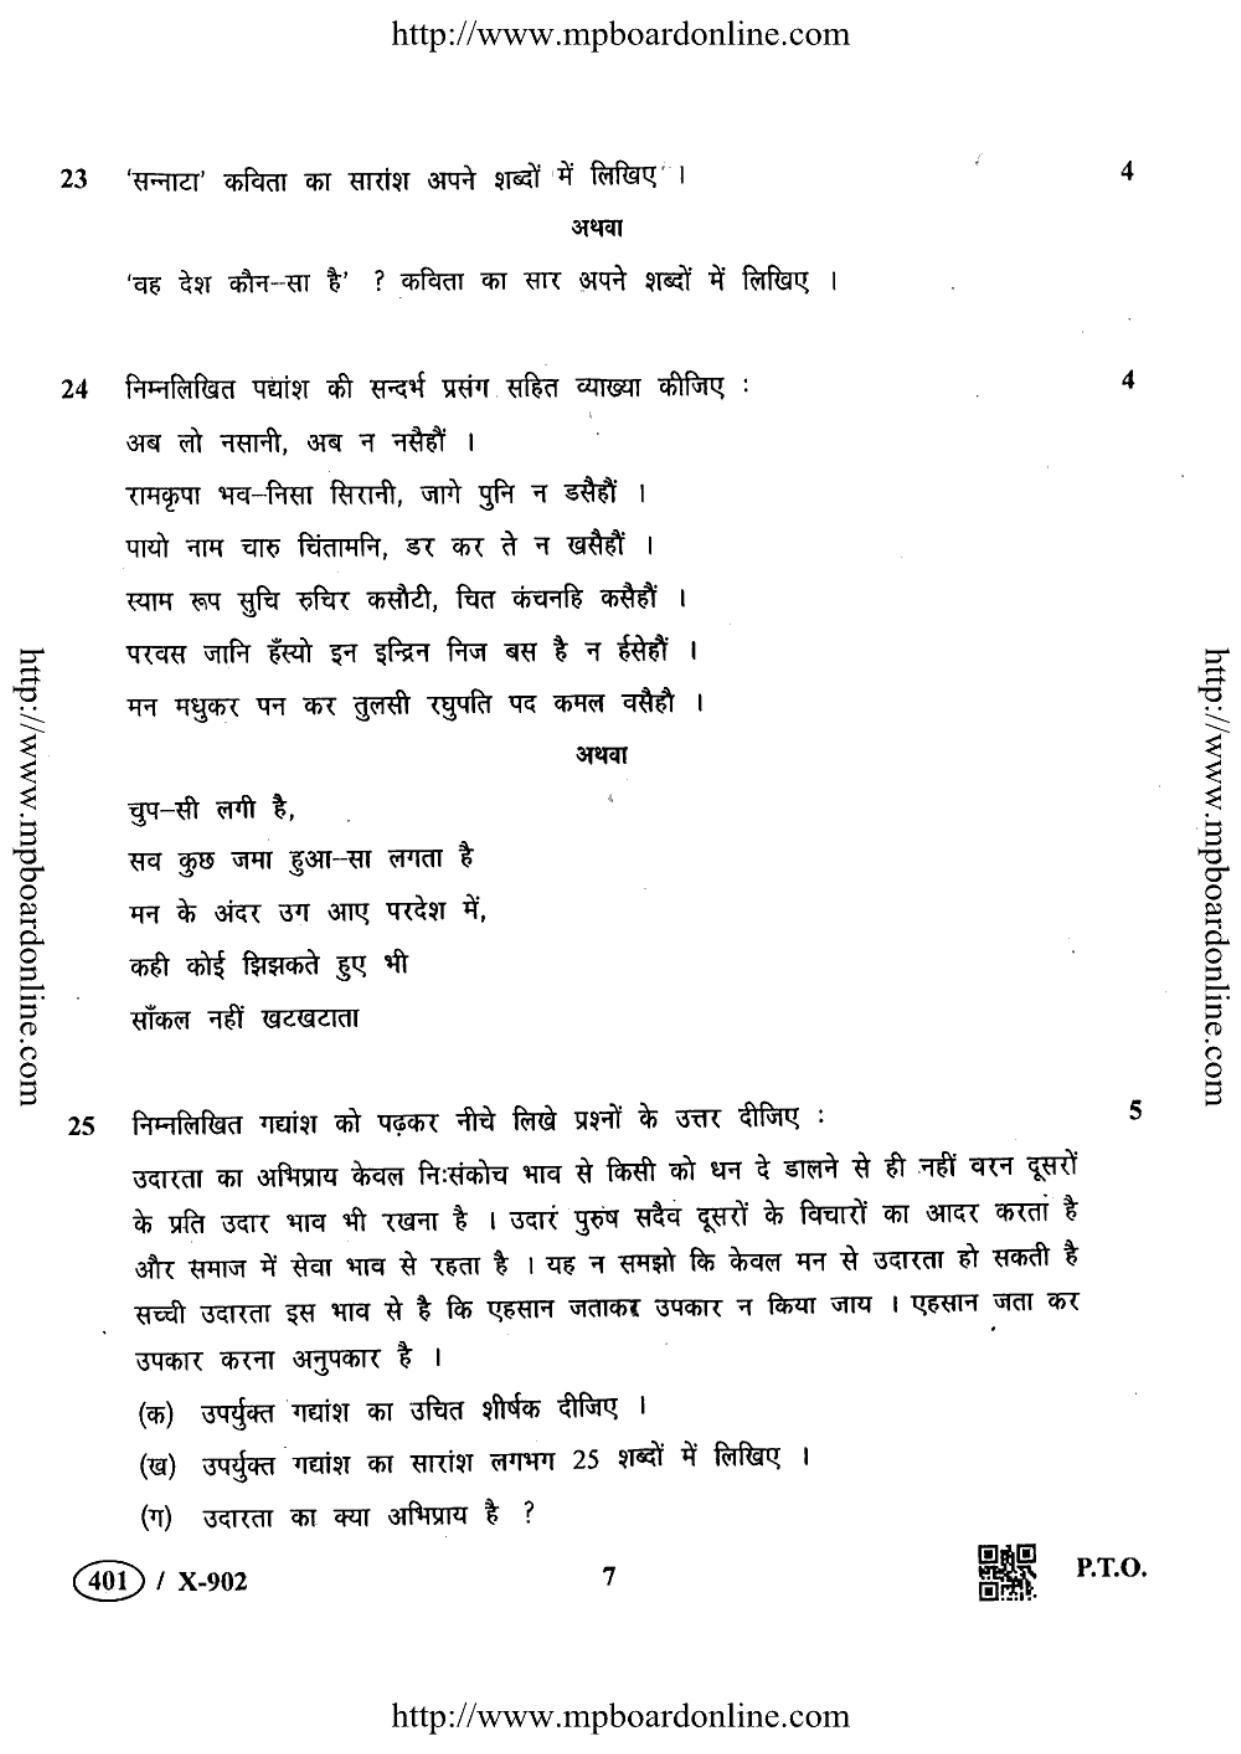 MP Board Class 10 Hindi General 2019 Question Paper - Page 7